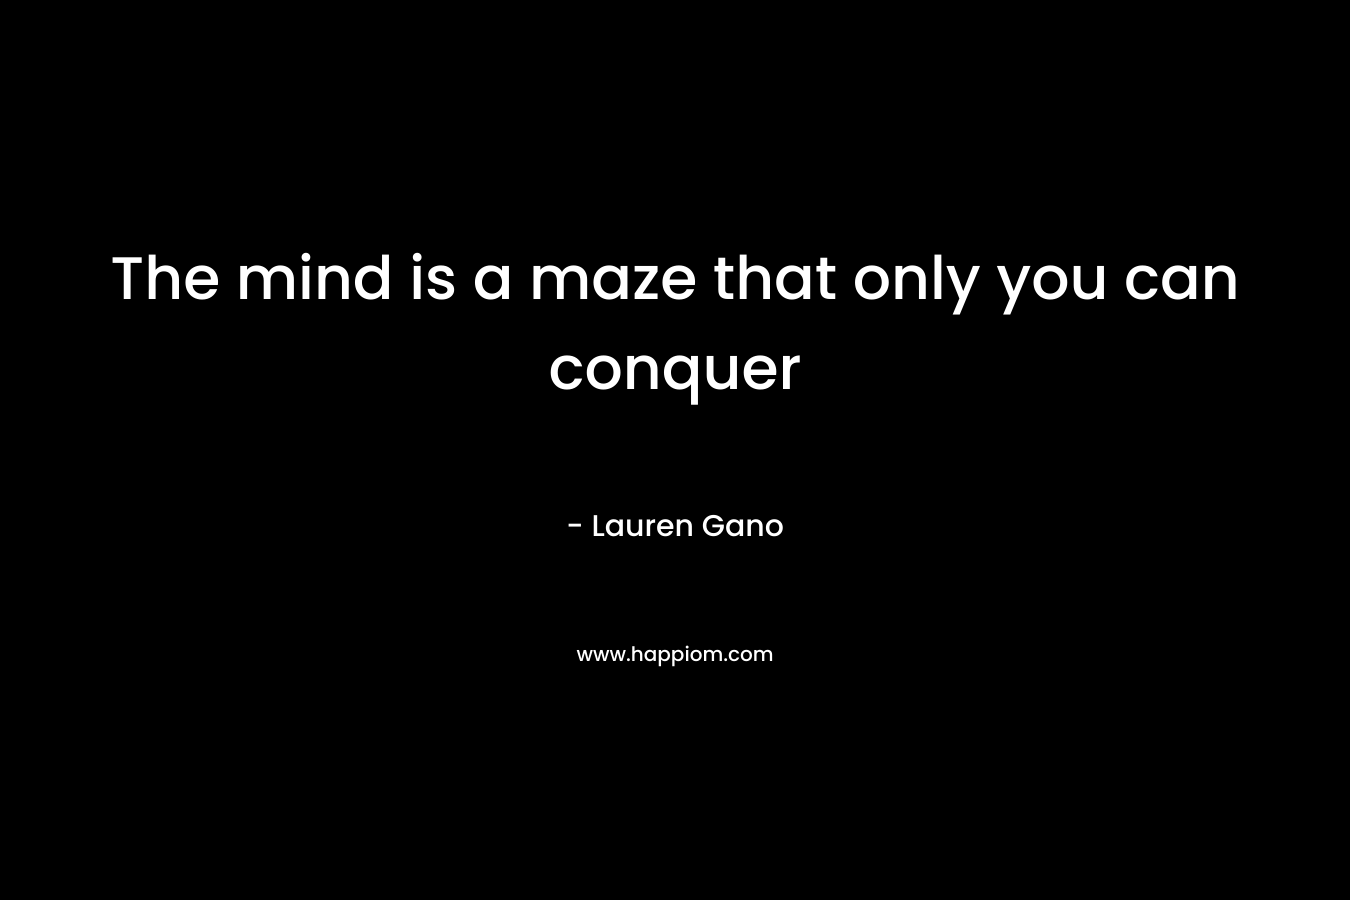 The mind is a maze that only you can conquer